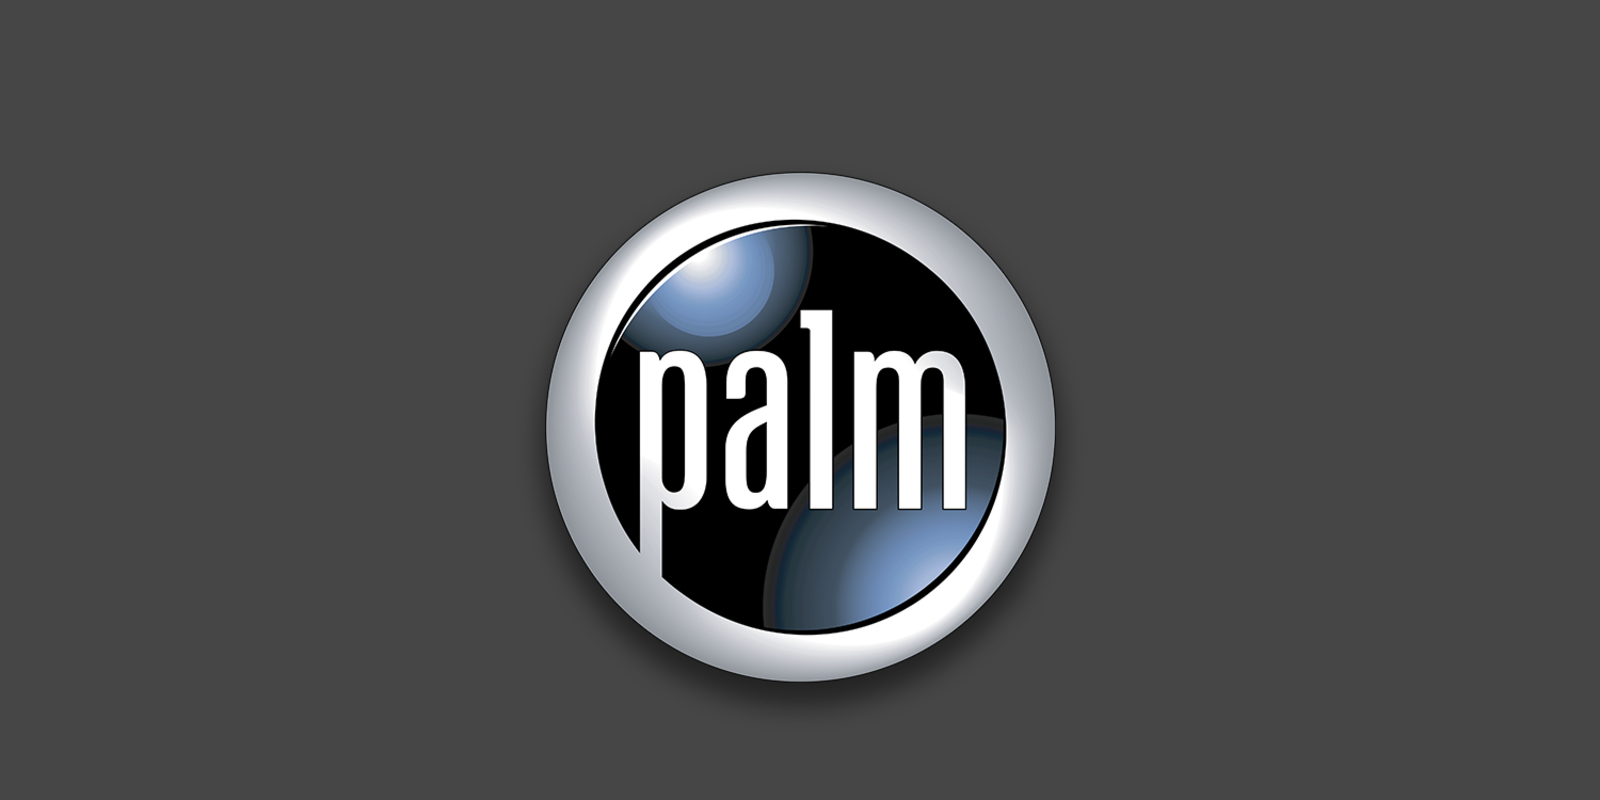 Palm Computing in 1994